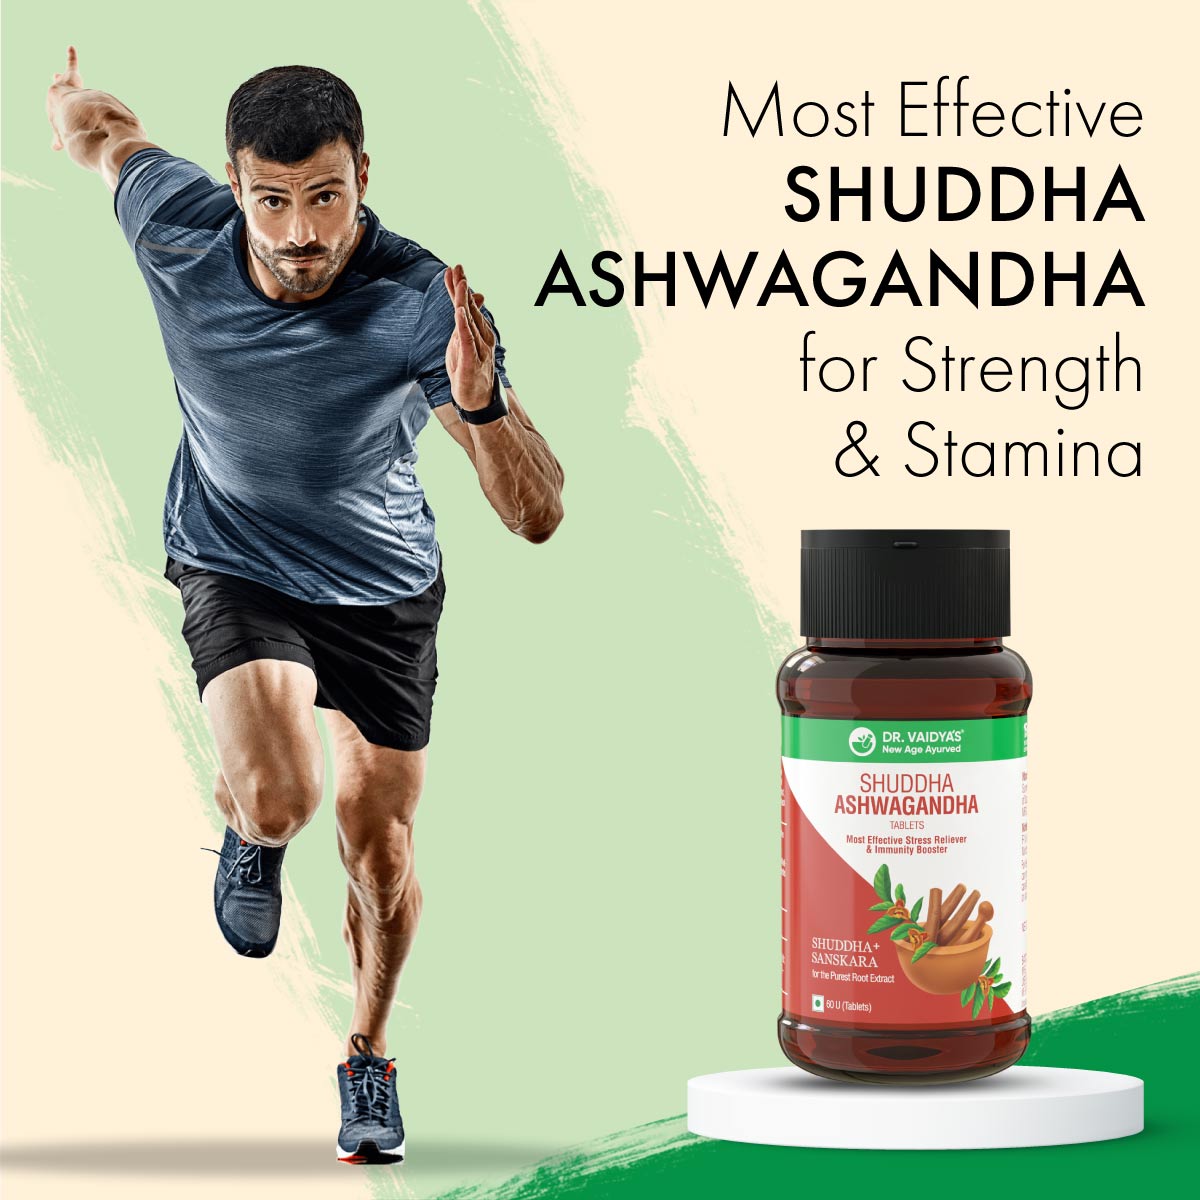 Shuddha Ashwagandha Tablets: Most Effective Stress Reliever & Immunity Booster